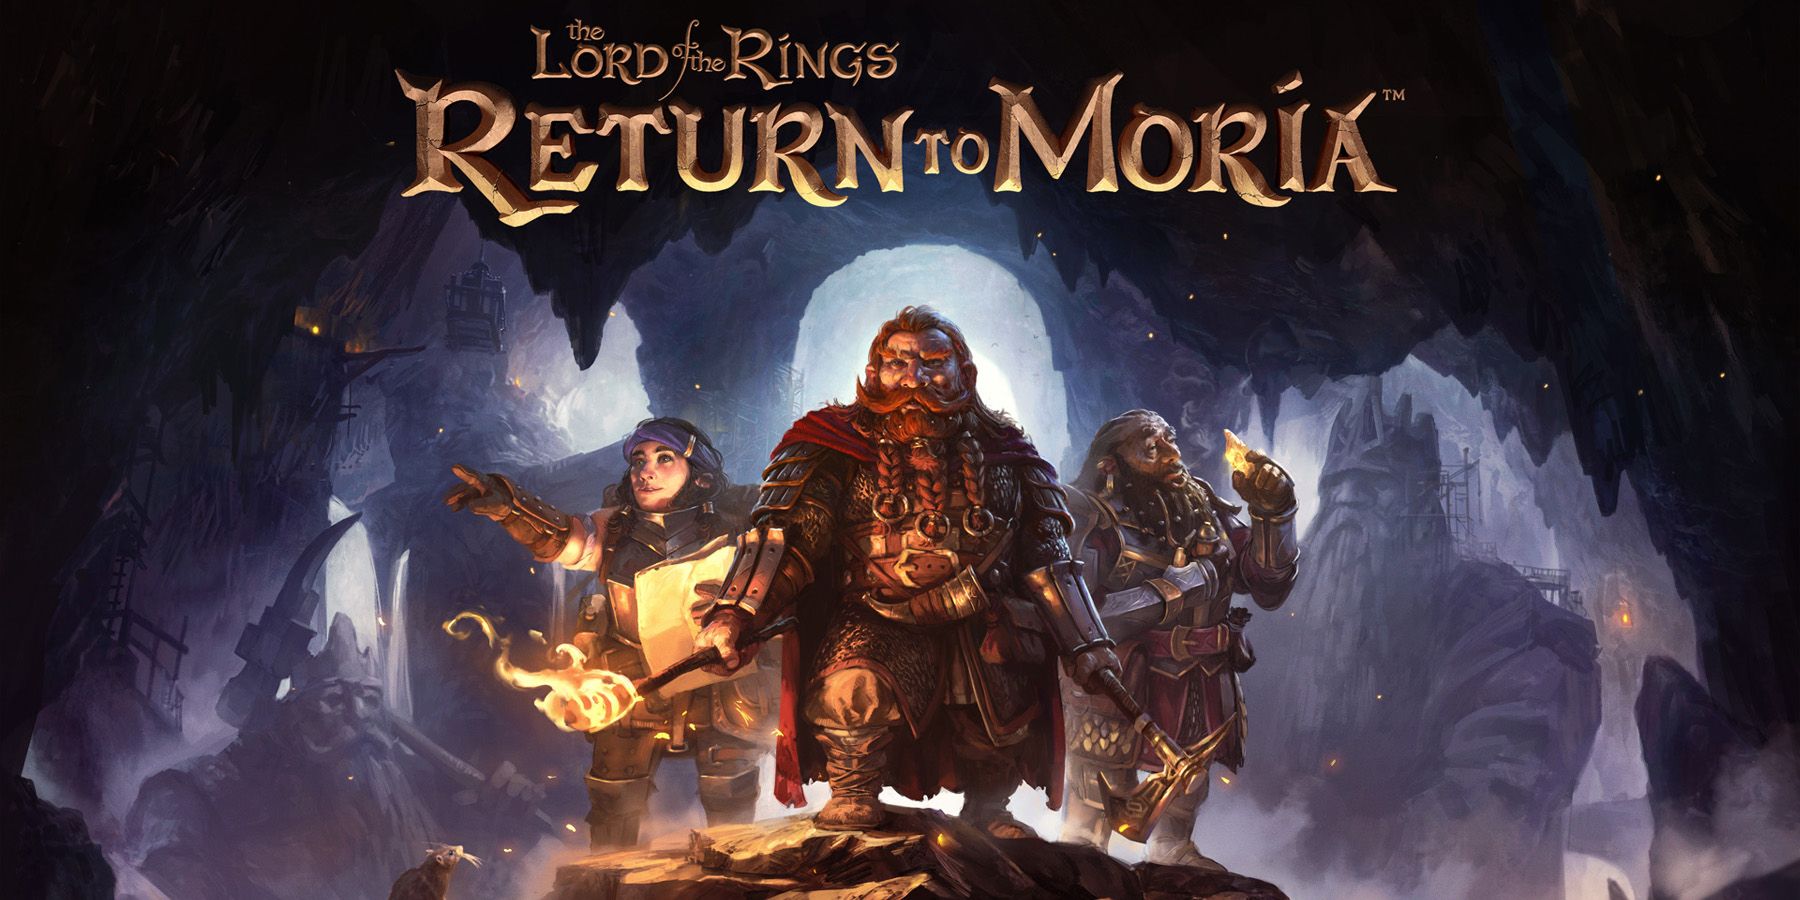 Key art for The Lord of the Rings: Return to Moria showing three Dwarves in a large cavern.